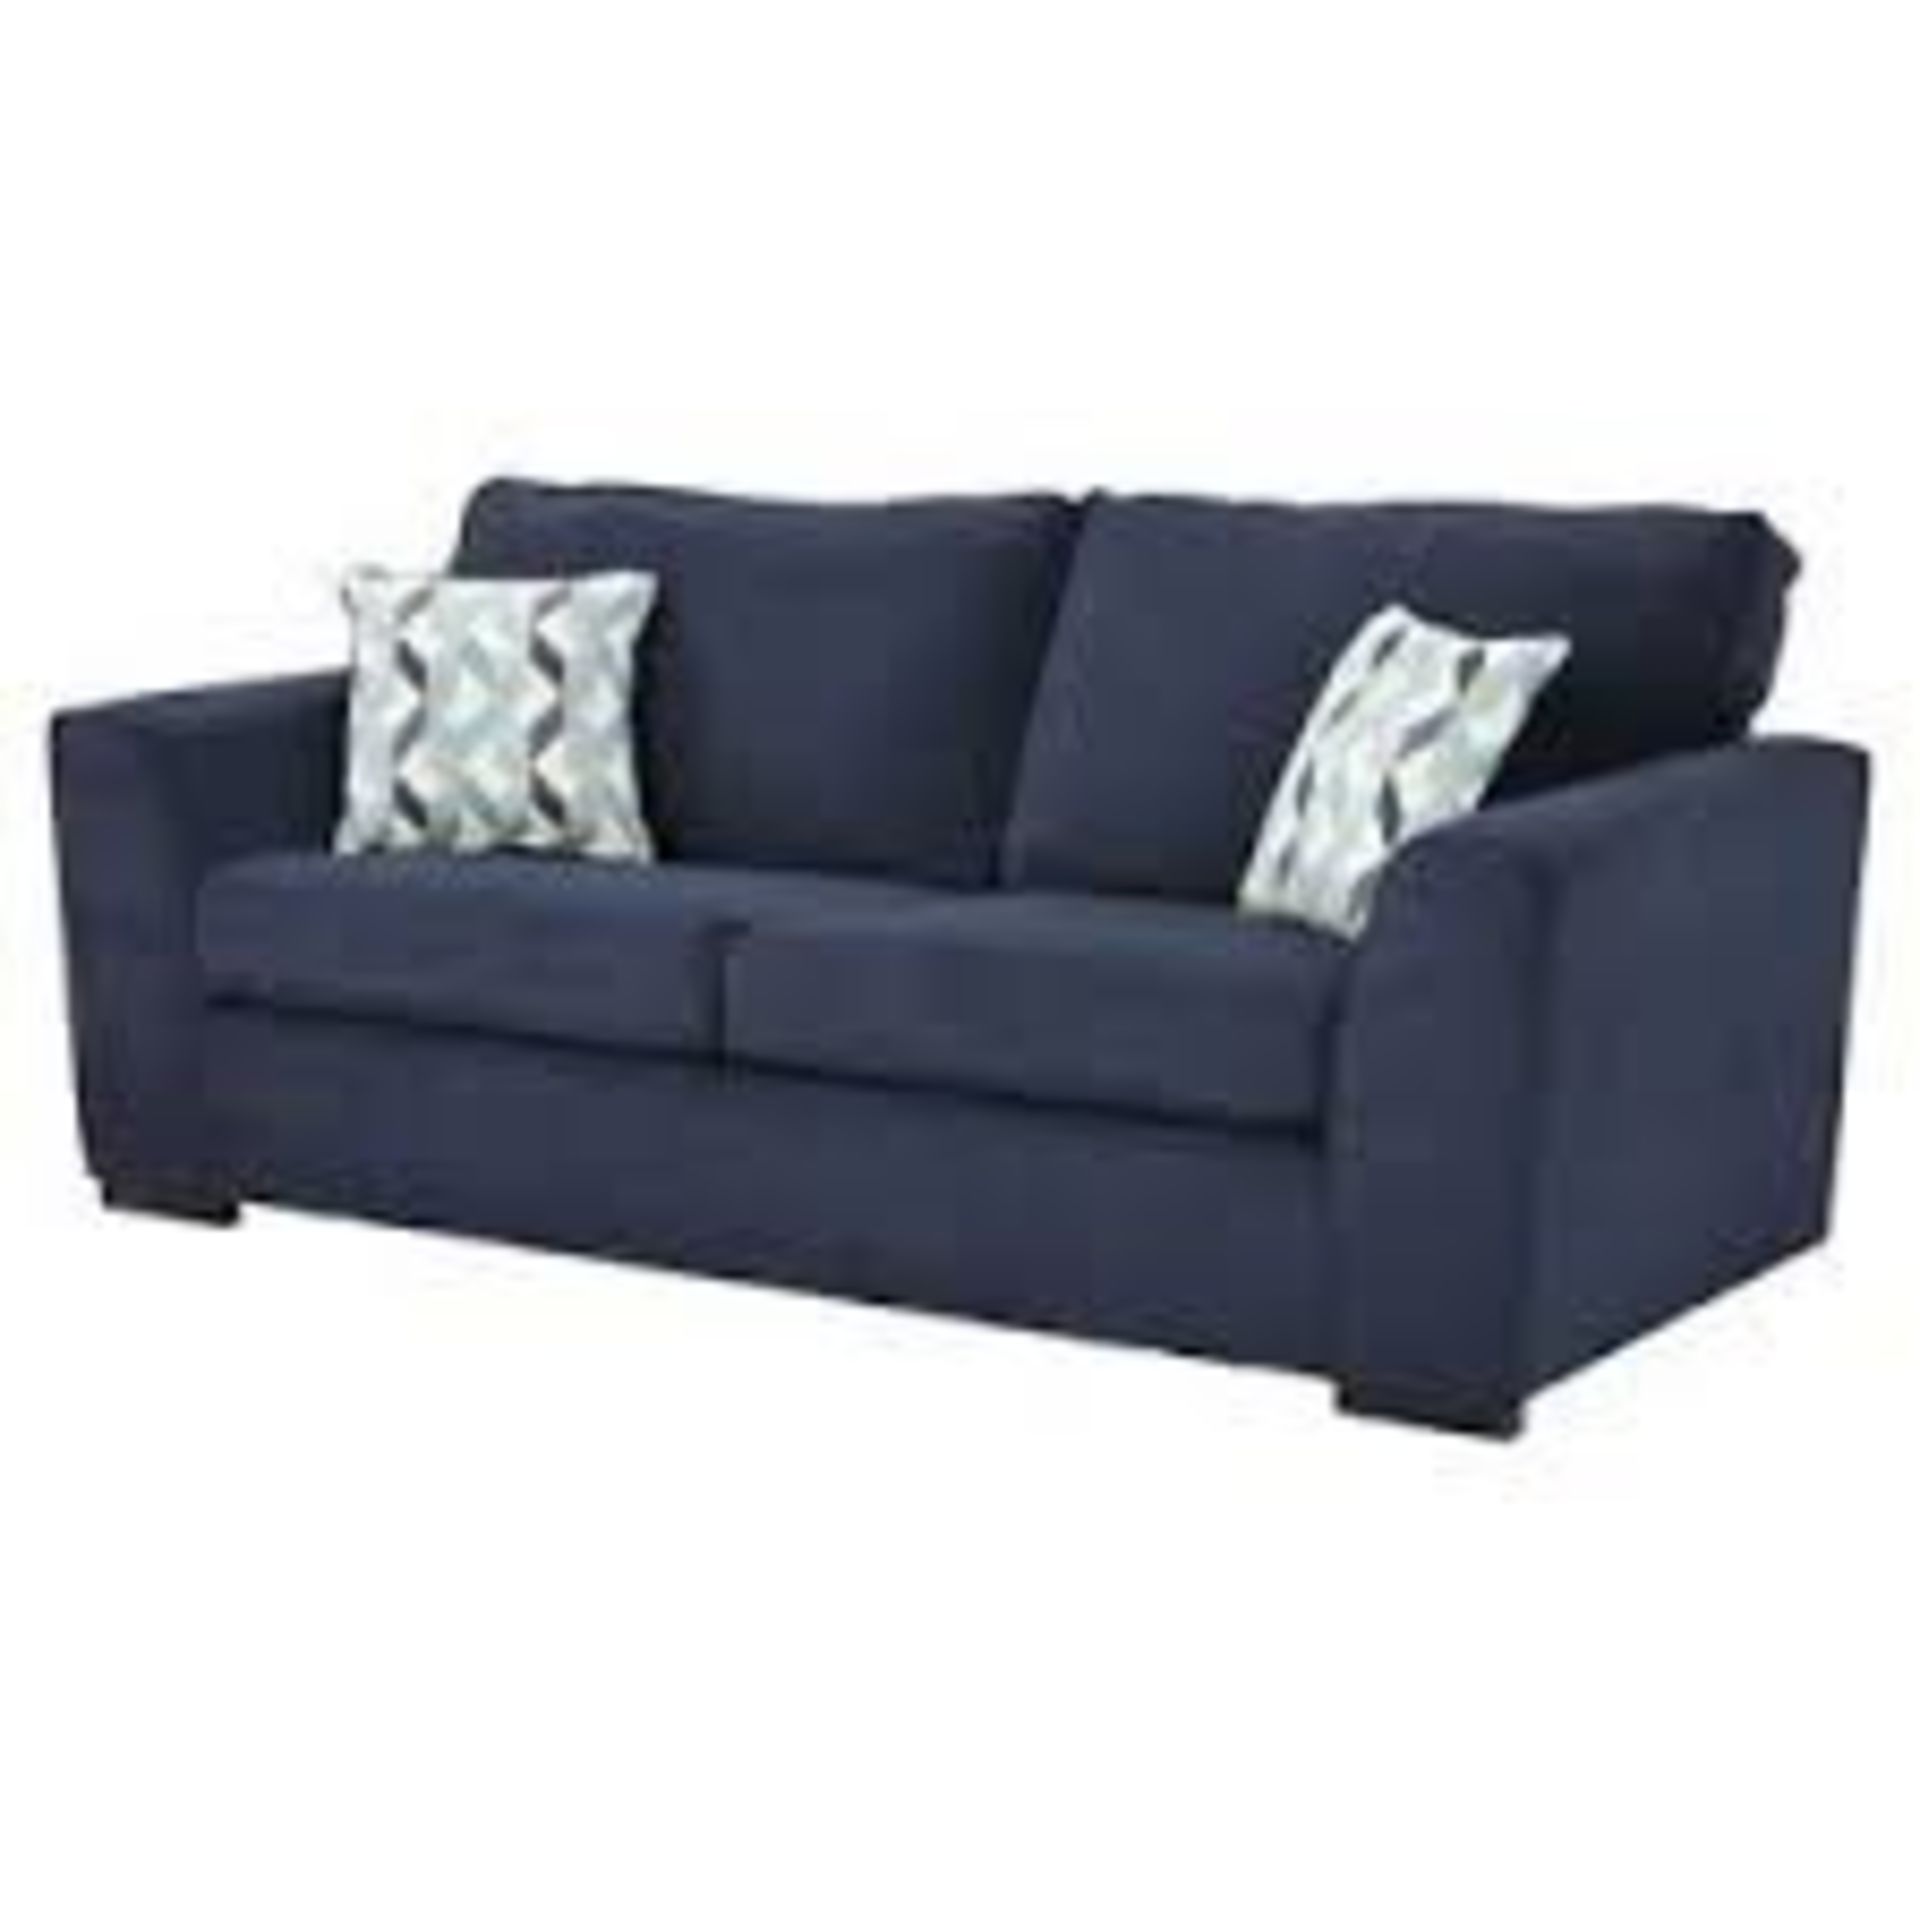 1 BRAND NEW BAGGED BOSTON 3 SEATER SOFA IN NAVY (VIEWING HIGHLY RECOMMENDED)